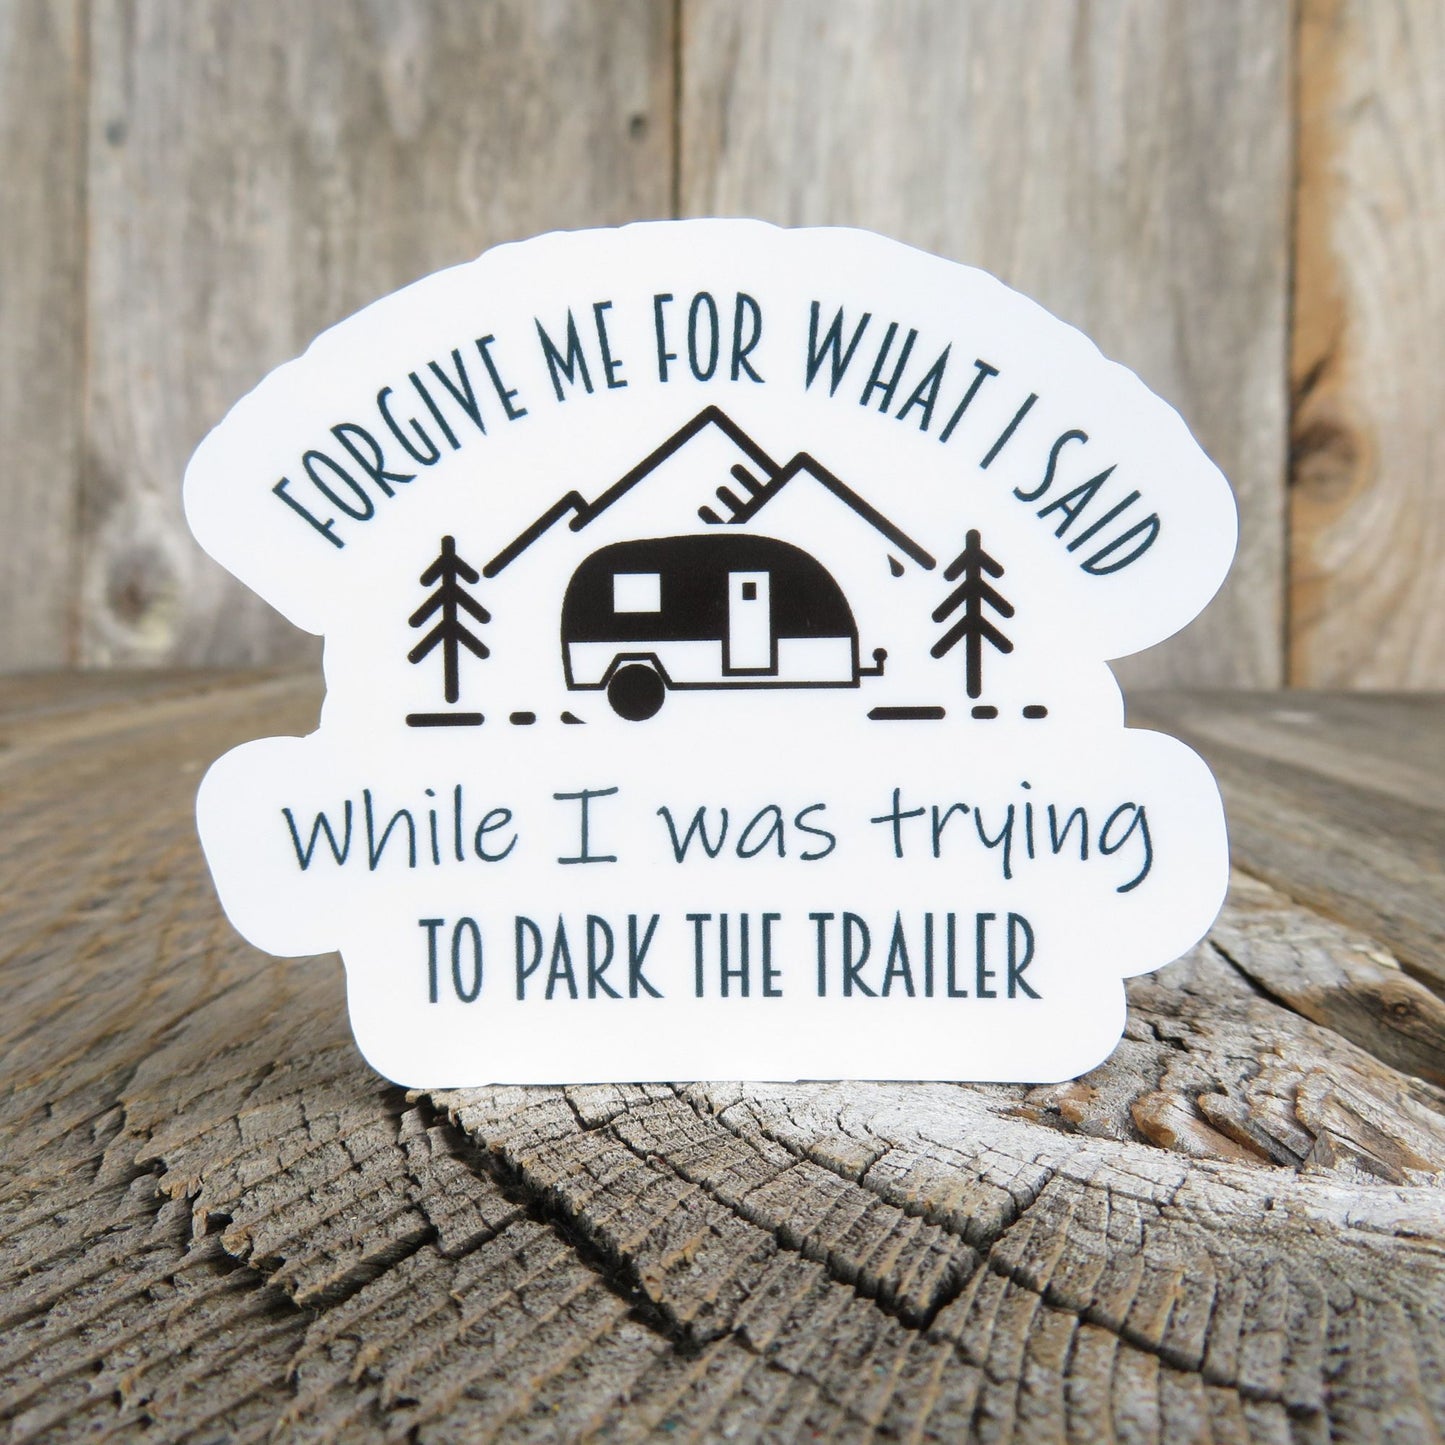 Travel Trailer Sticker Forgive Me For What I Said While Parking Trailer Black White Waterproof Car Water Bottle Laptop